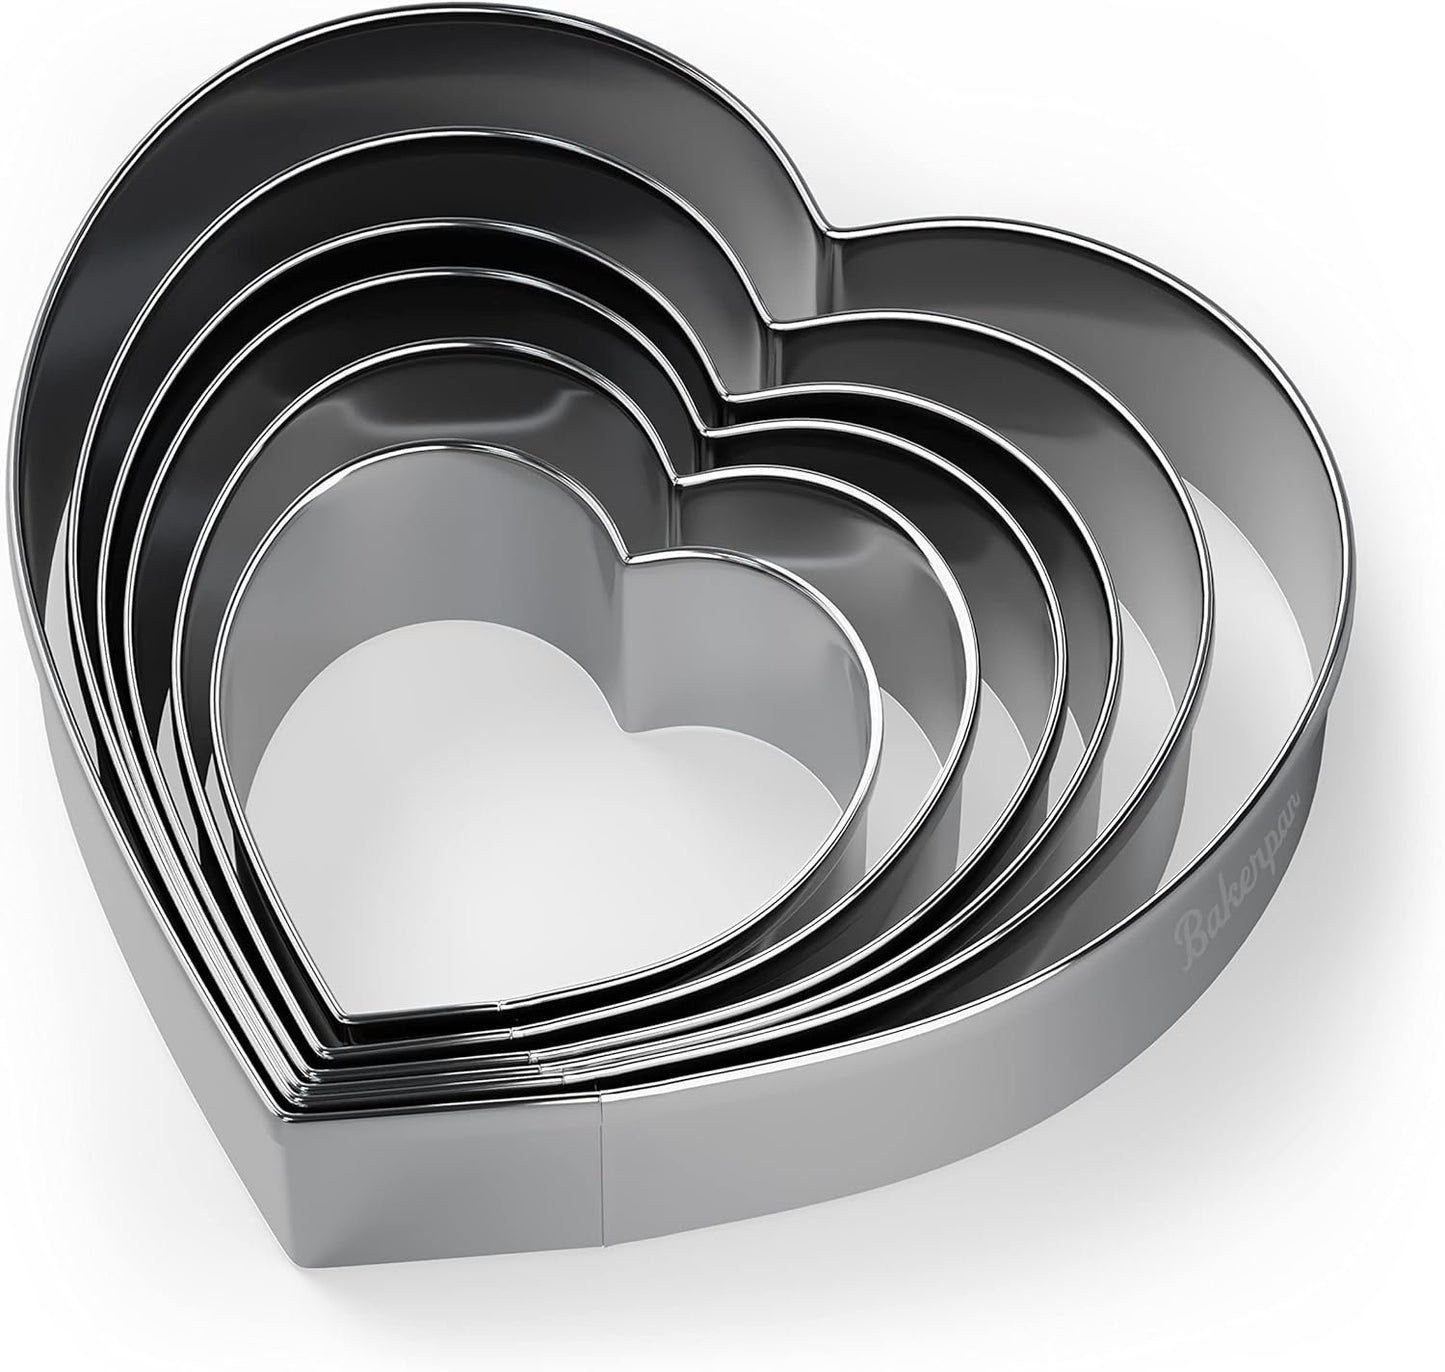 Bakerpan Stainless Steel Heart Cookie Cutter Set, Valentine's Day Cookie Cutters